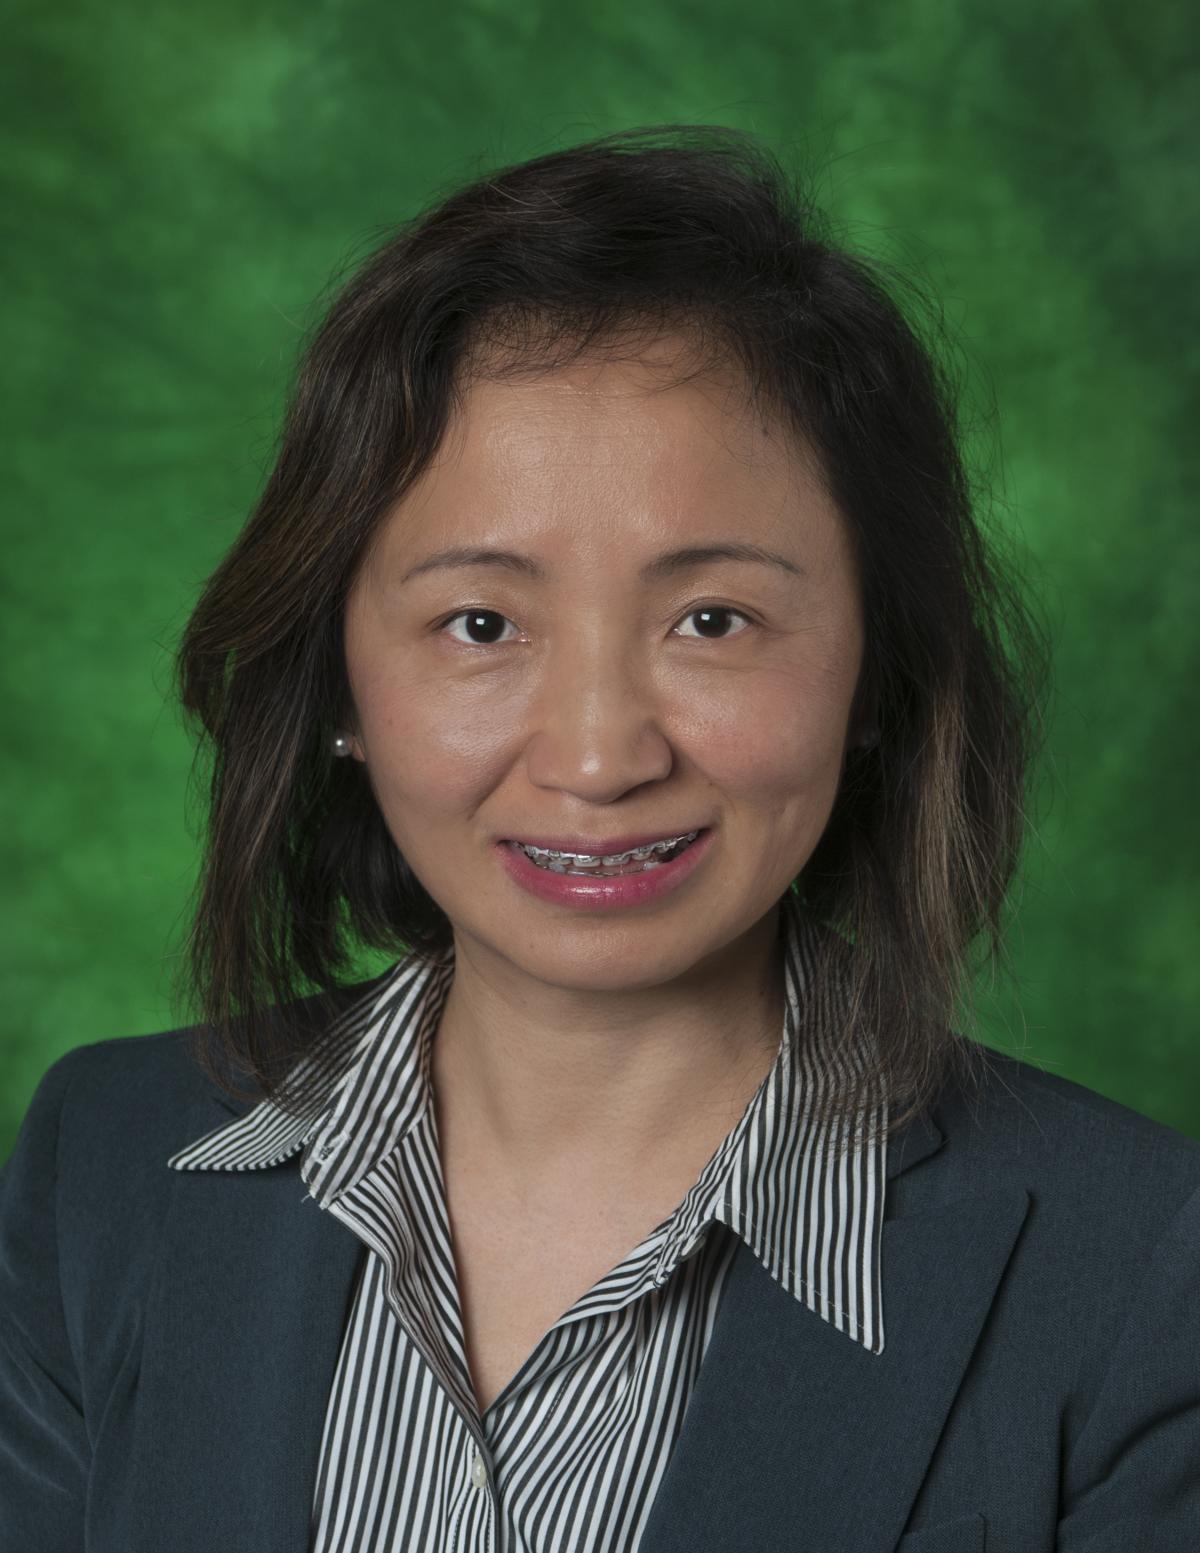 Yan Huang in front of green background